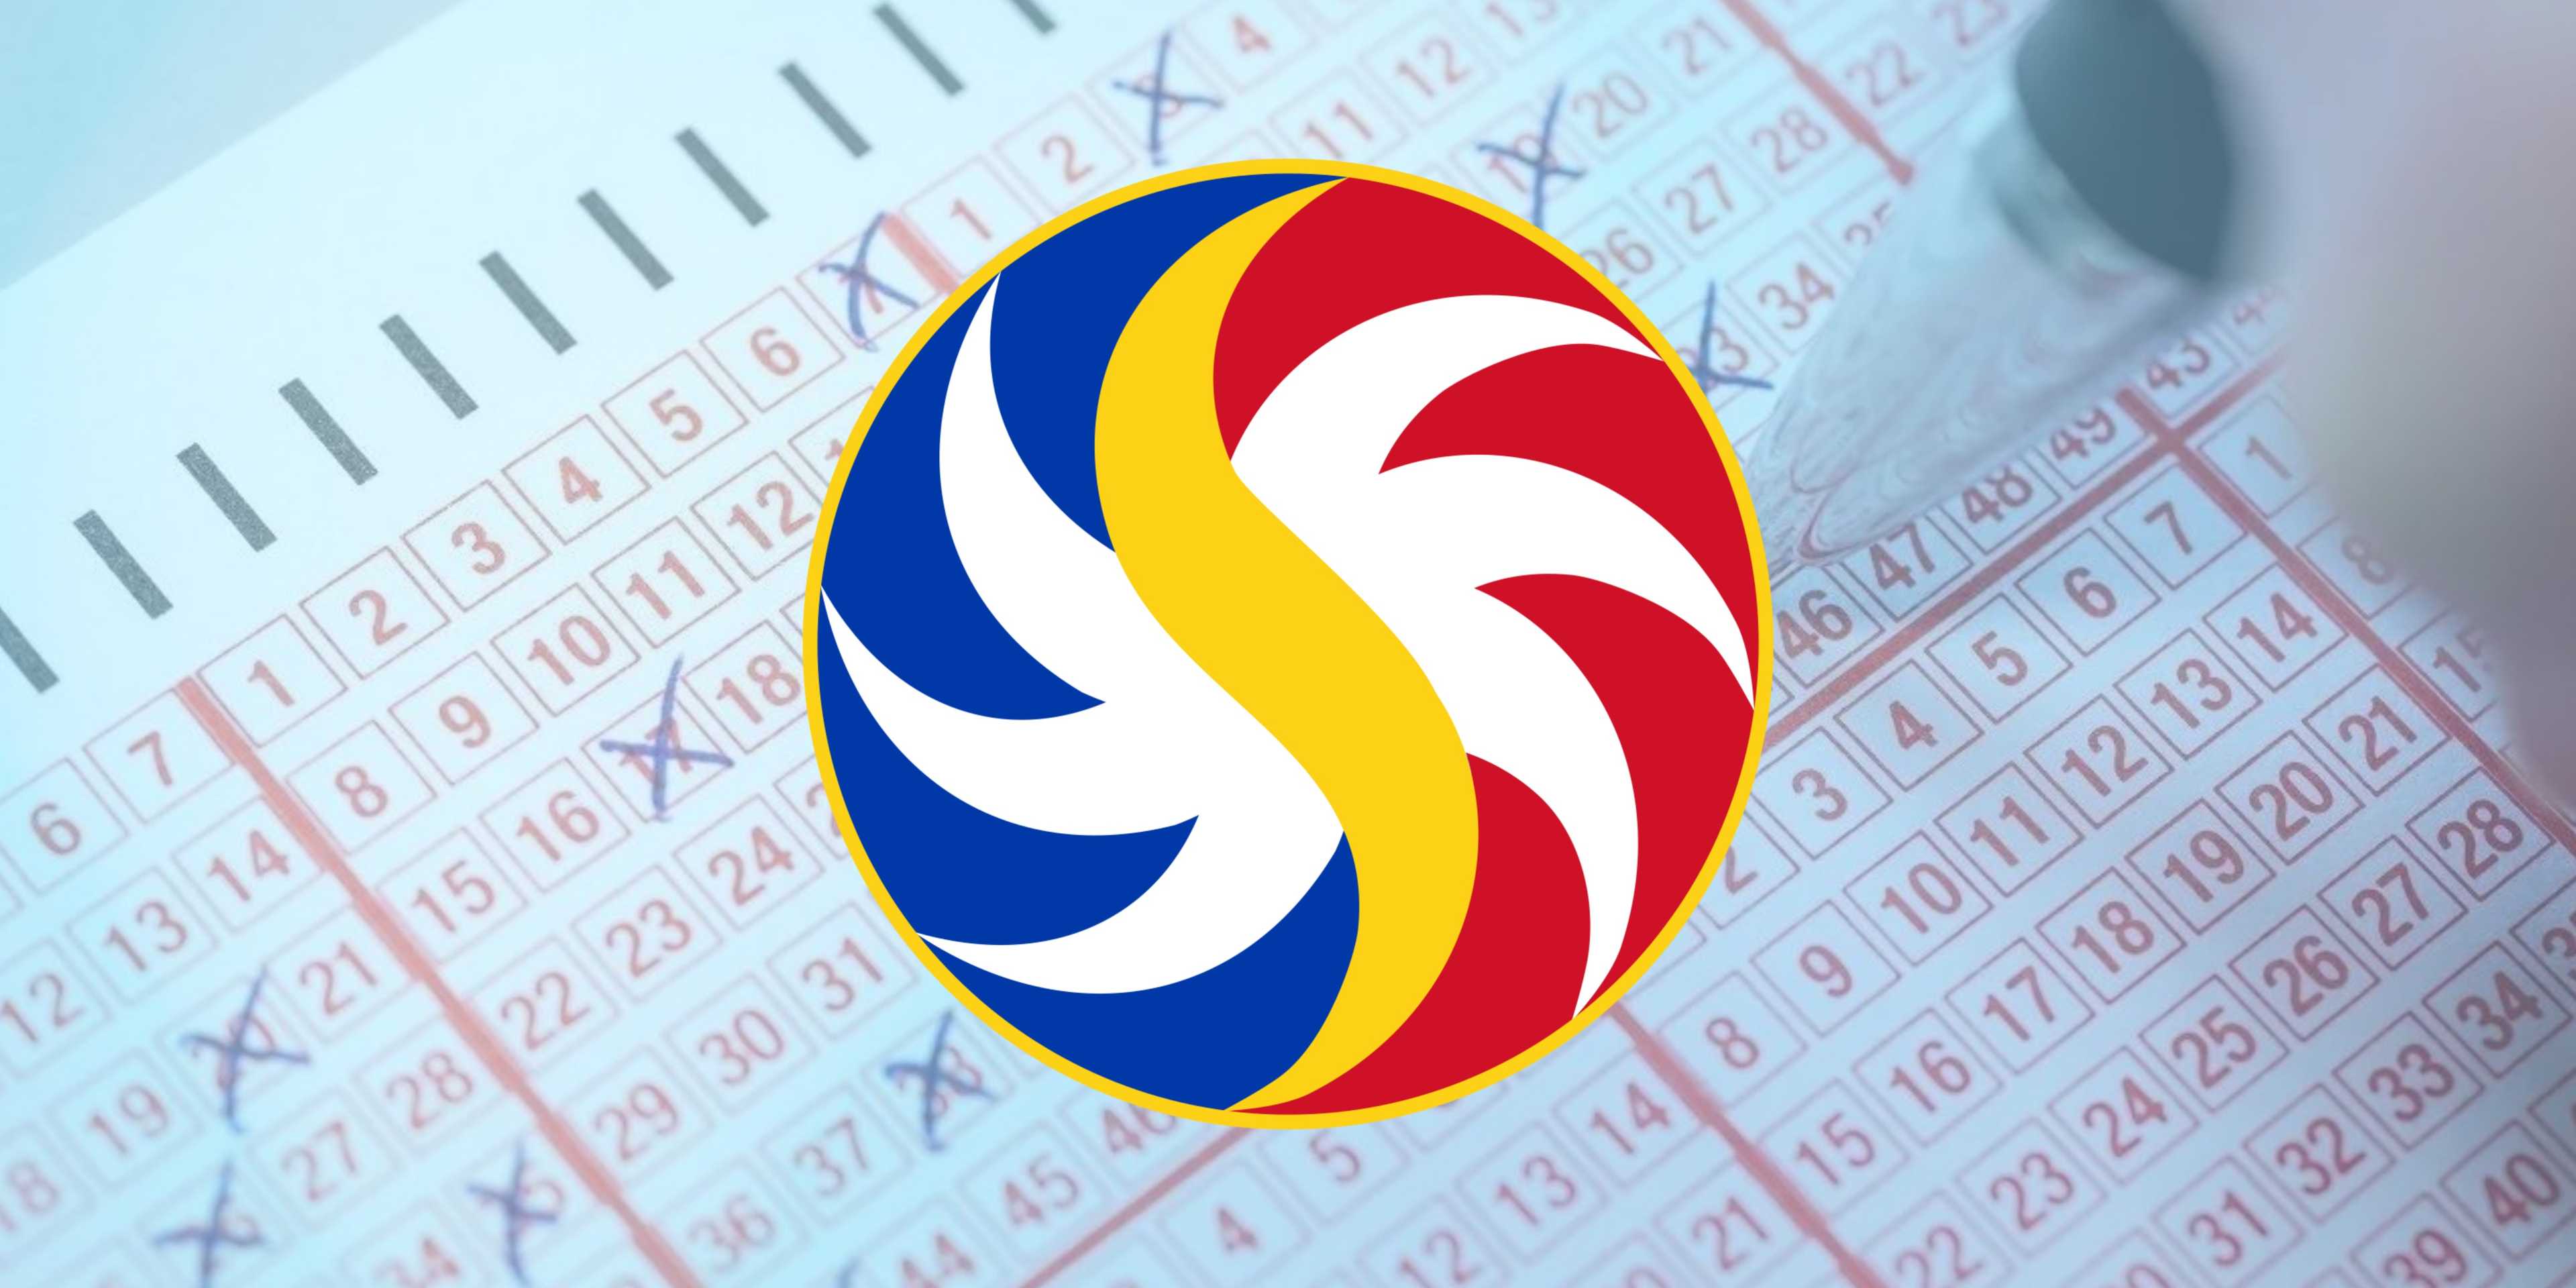 PCSO Lotto Draw Results on Sunday, February 25